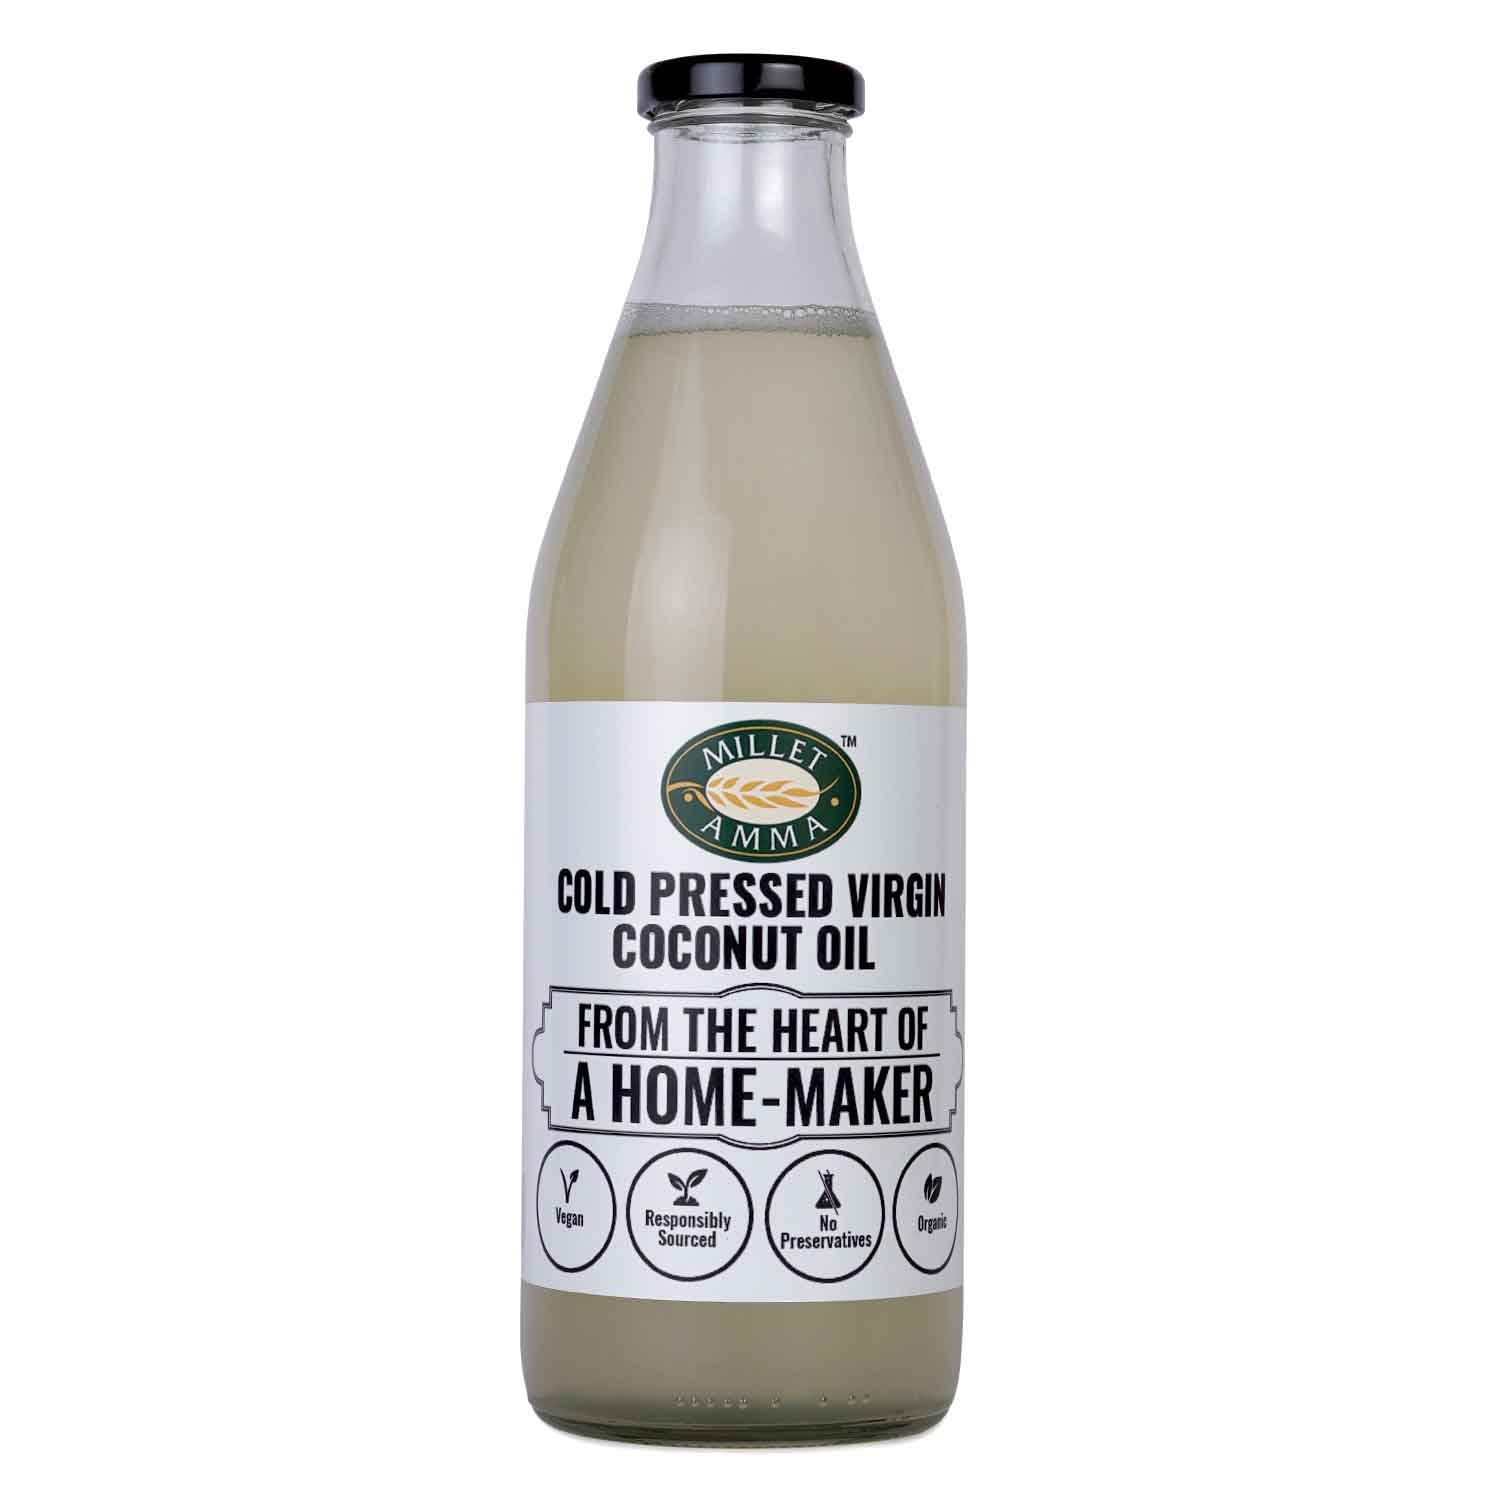 Millet Amma’s Organic Cold Pressed Virgin Coconut Oil- Introducing to you our highly nutritious and yummy Organic Cold Pressed Virgin Coconut Oil.  Made from Organic Coconuts, it helps raise good cholesterol levels.  Cold Pressed Oils are extremely healthy as they retain the nutrients  after extraction and processing.